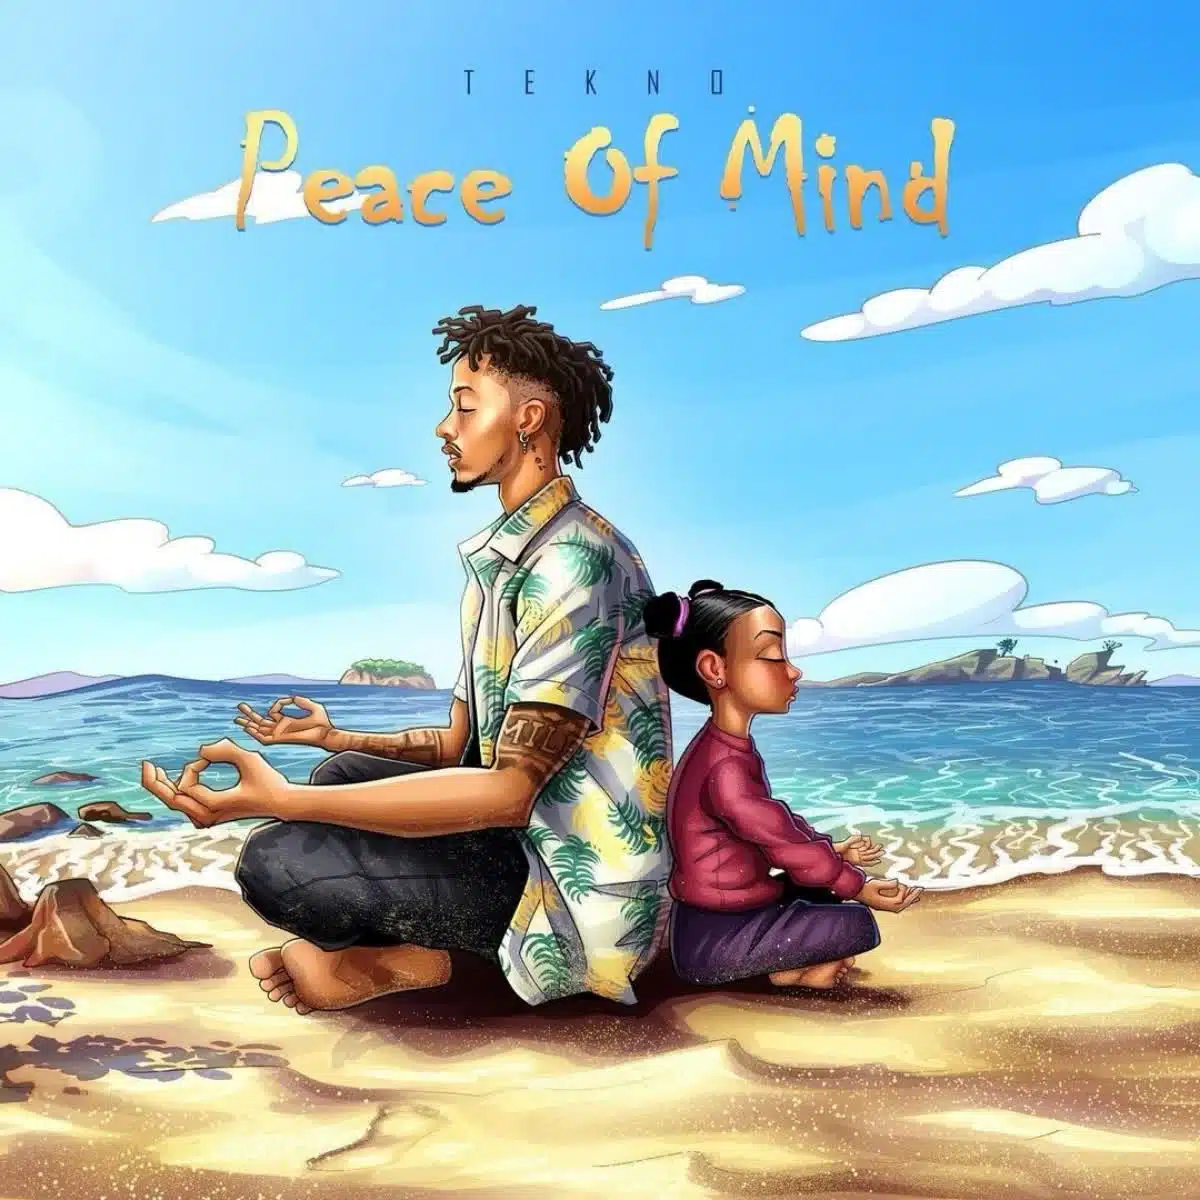 DOWNLOAD: Tekno – “Peace of Mind” Video + Audio Mp3